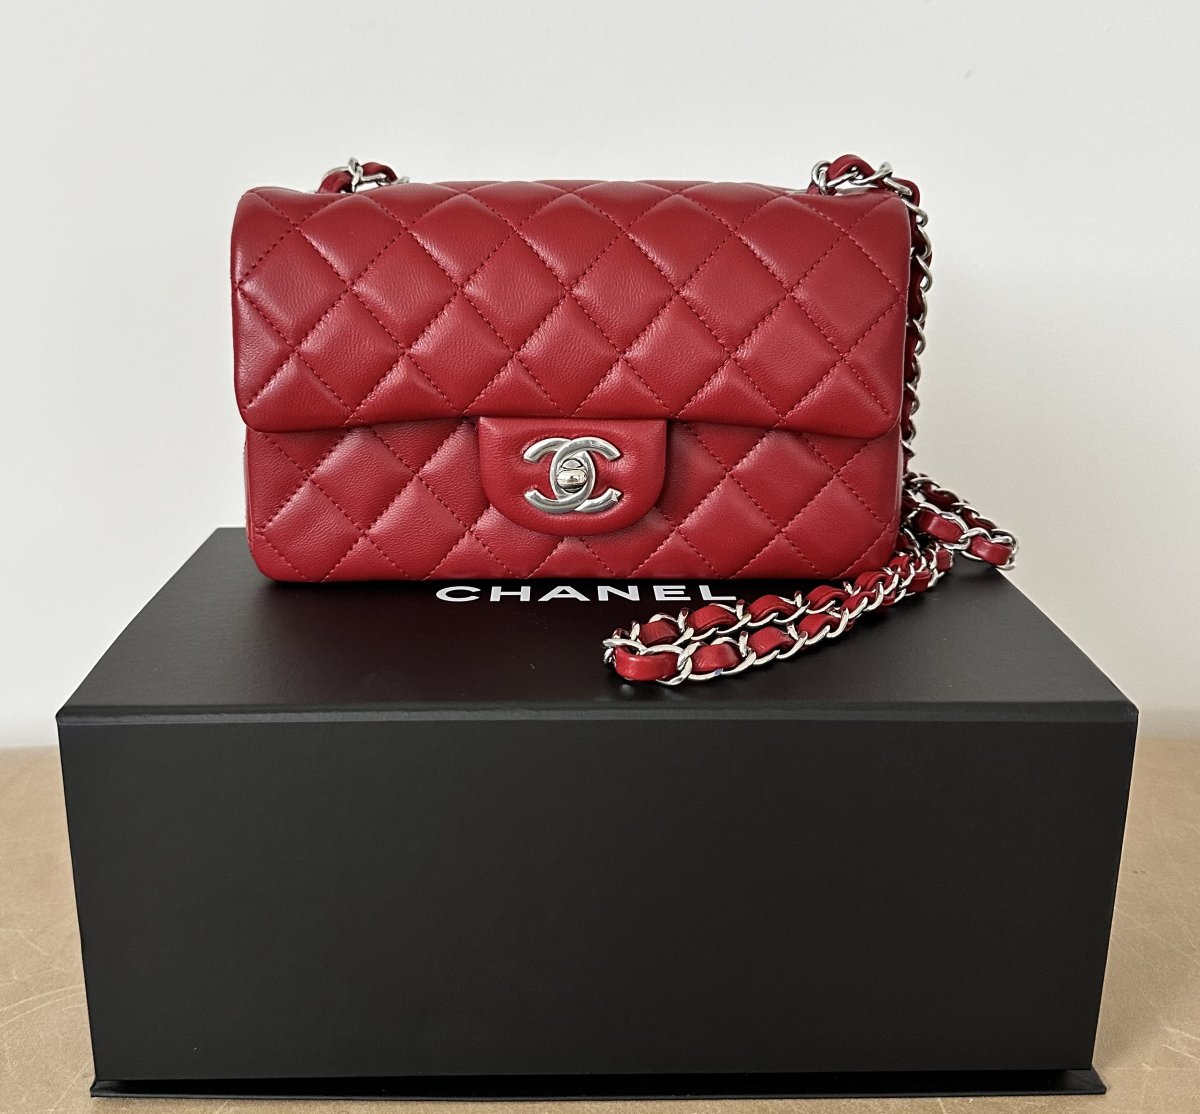 Chanel Red mini flap bag silver hardware